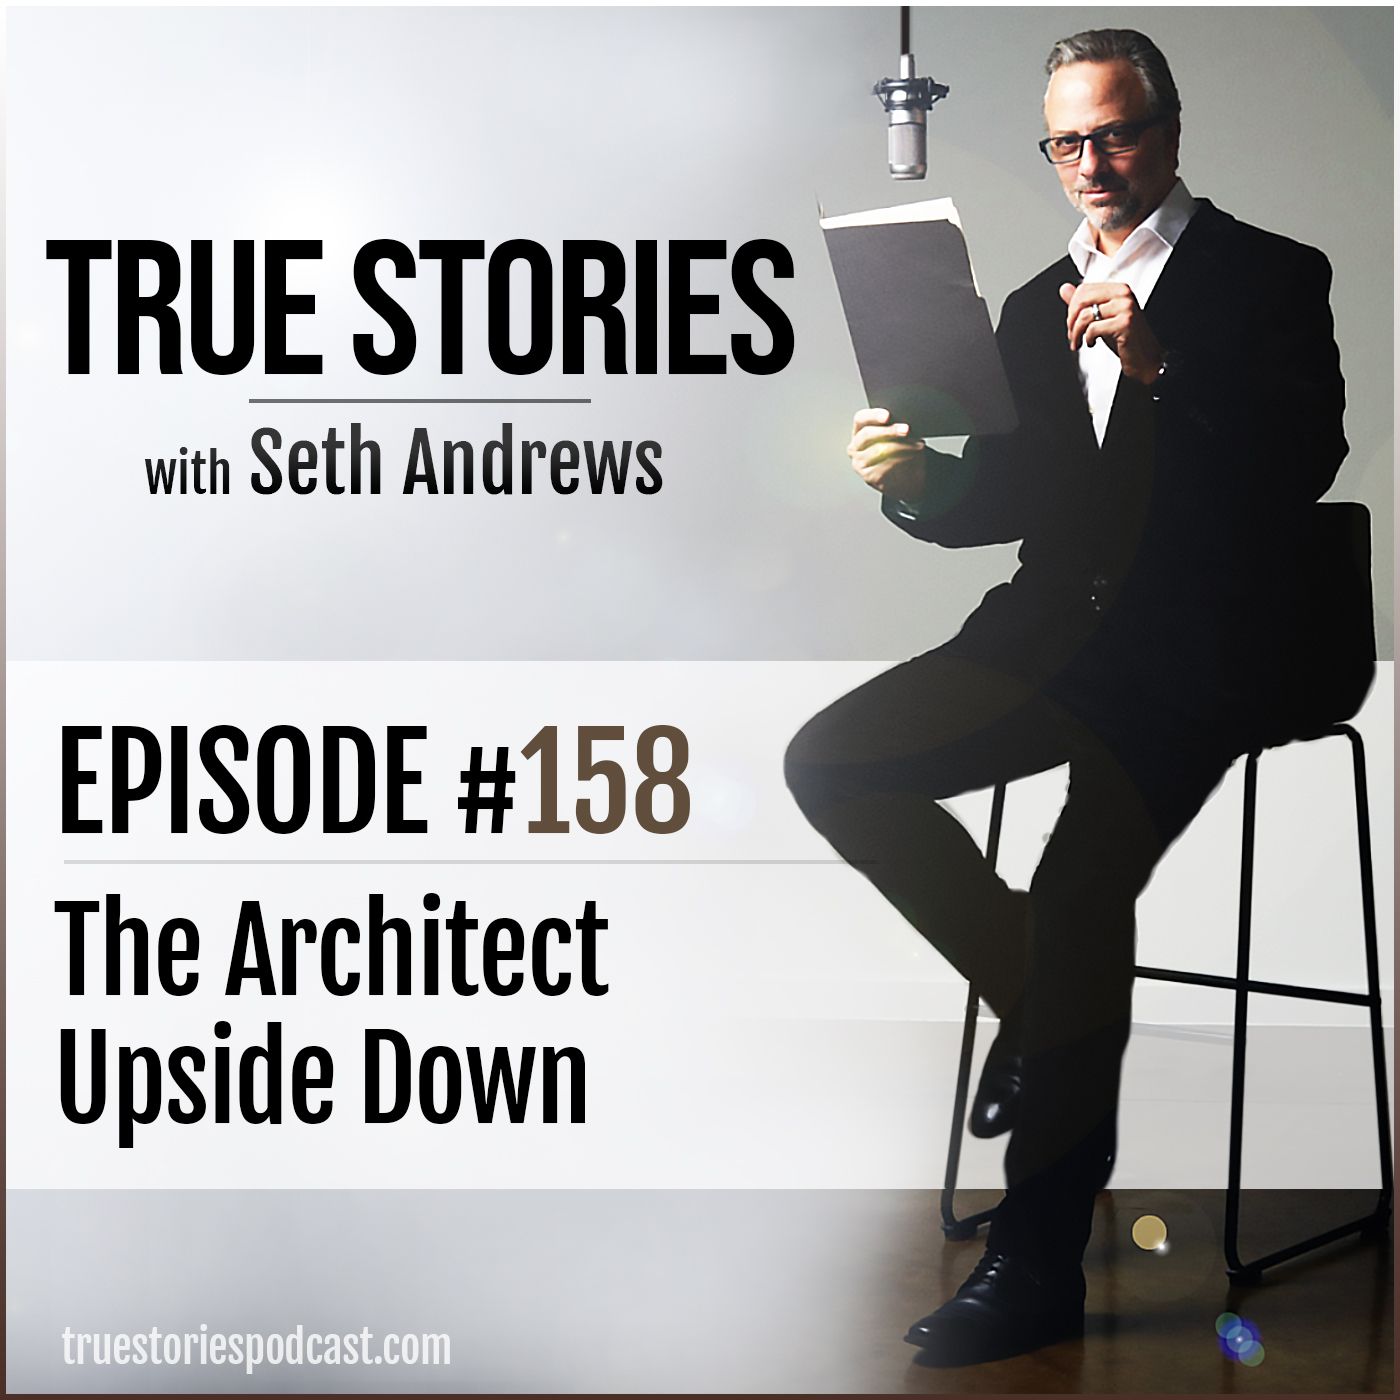 True Stories #158 - The Architect Upside Down